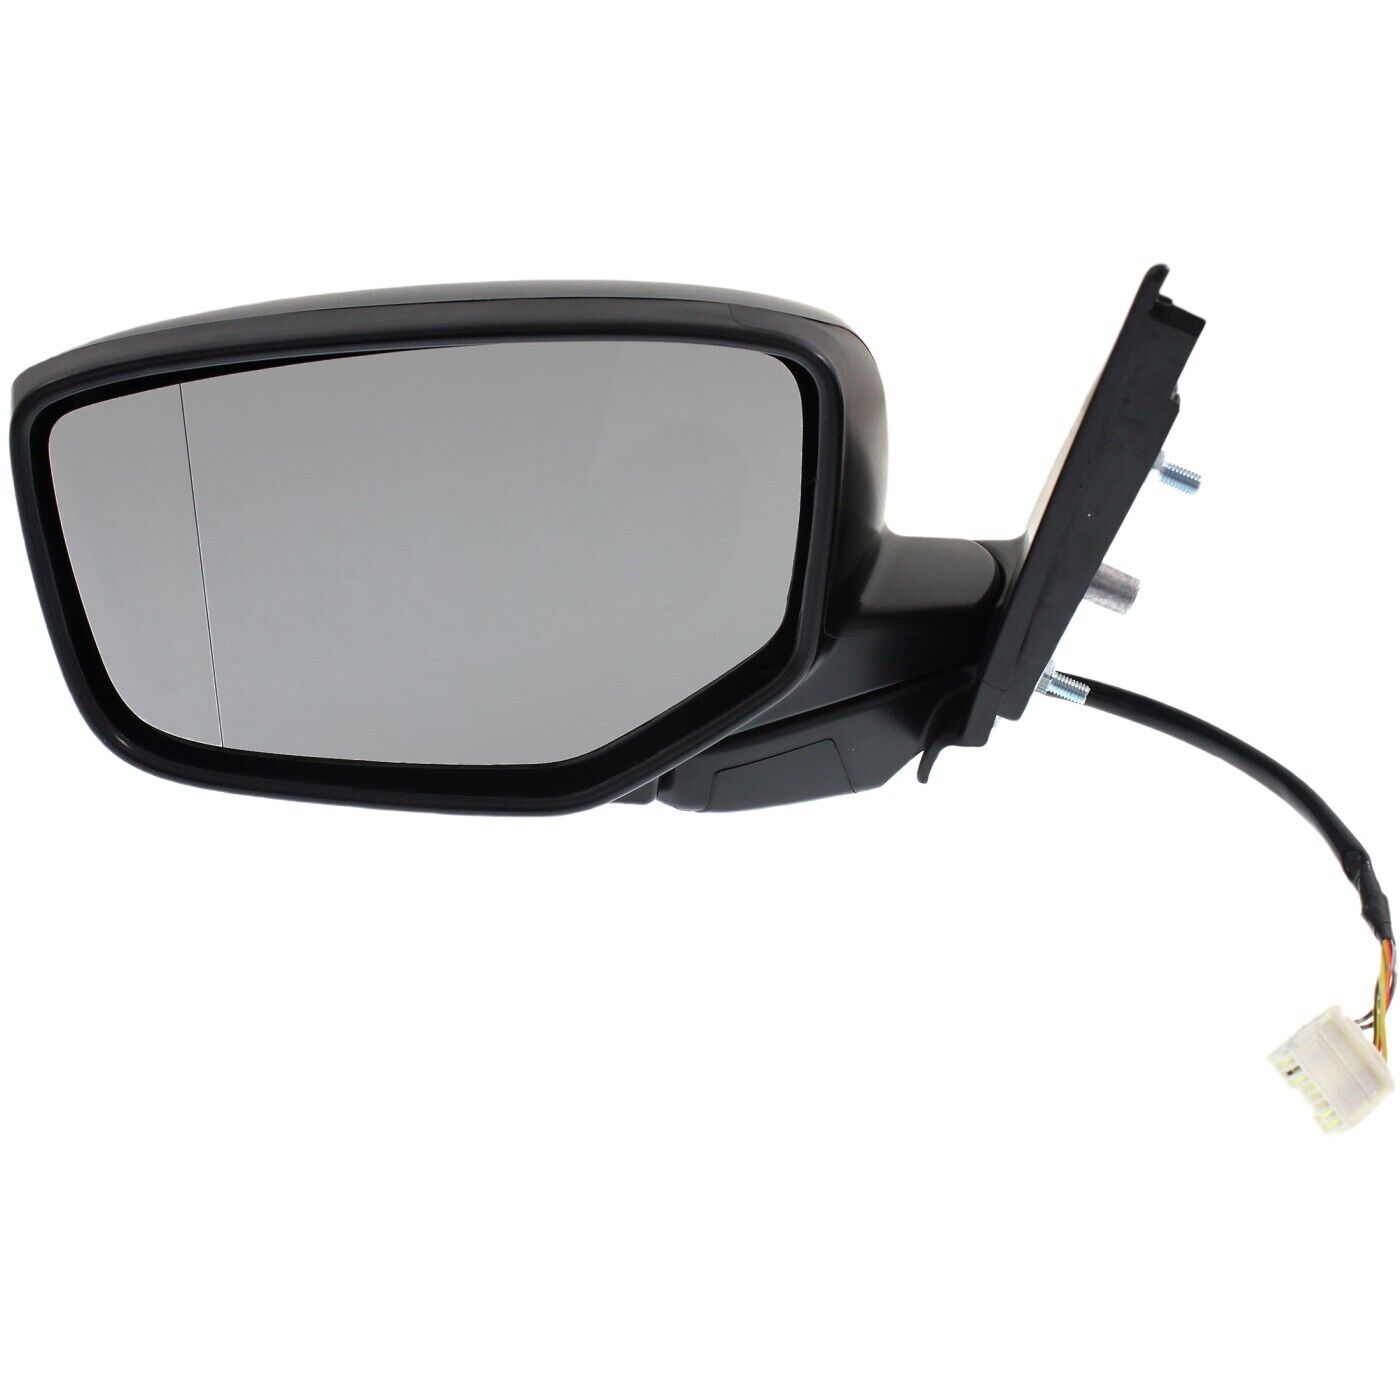 Power Mirror For 2013-2018 Acura ILX Left Manual Folding Heated Paint To Match